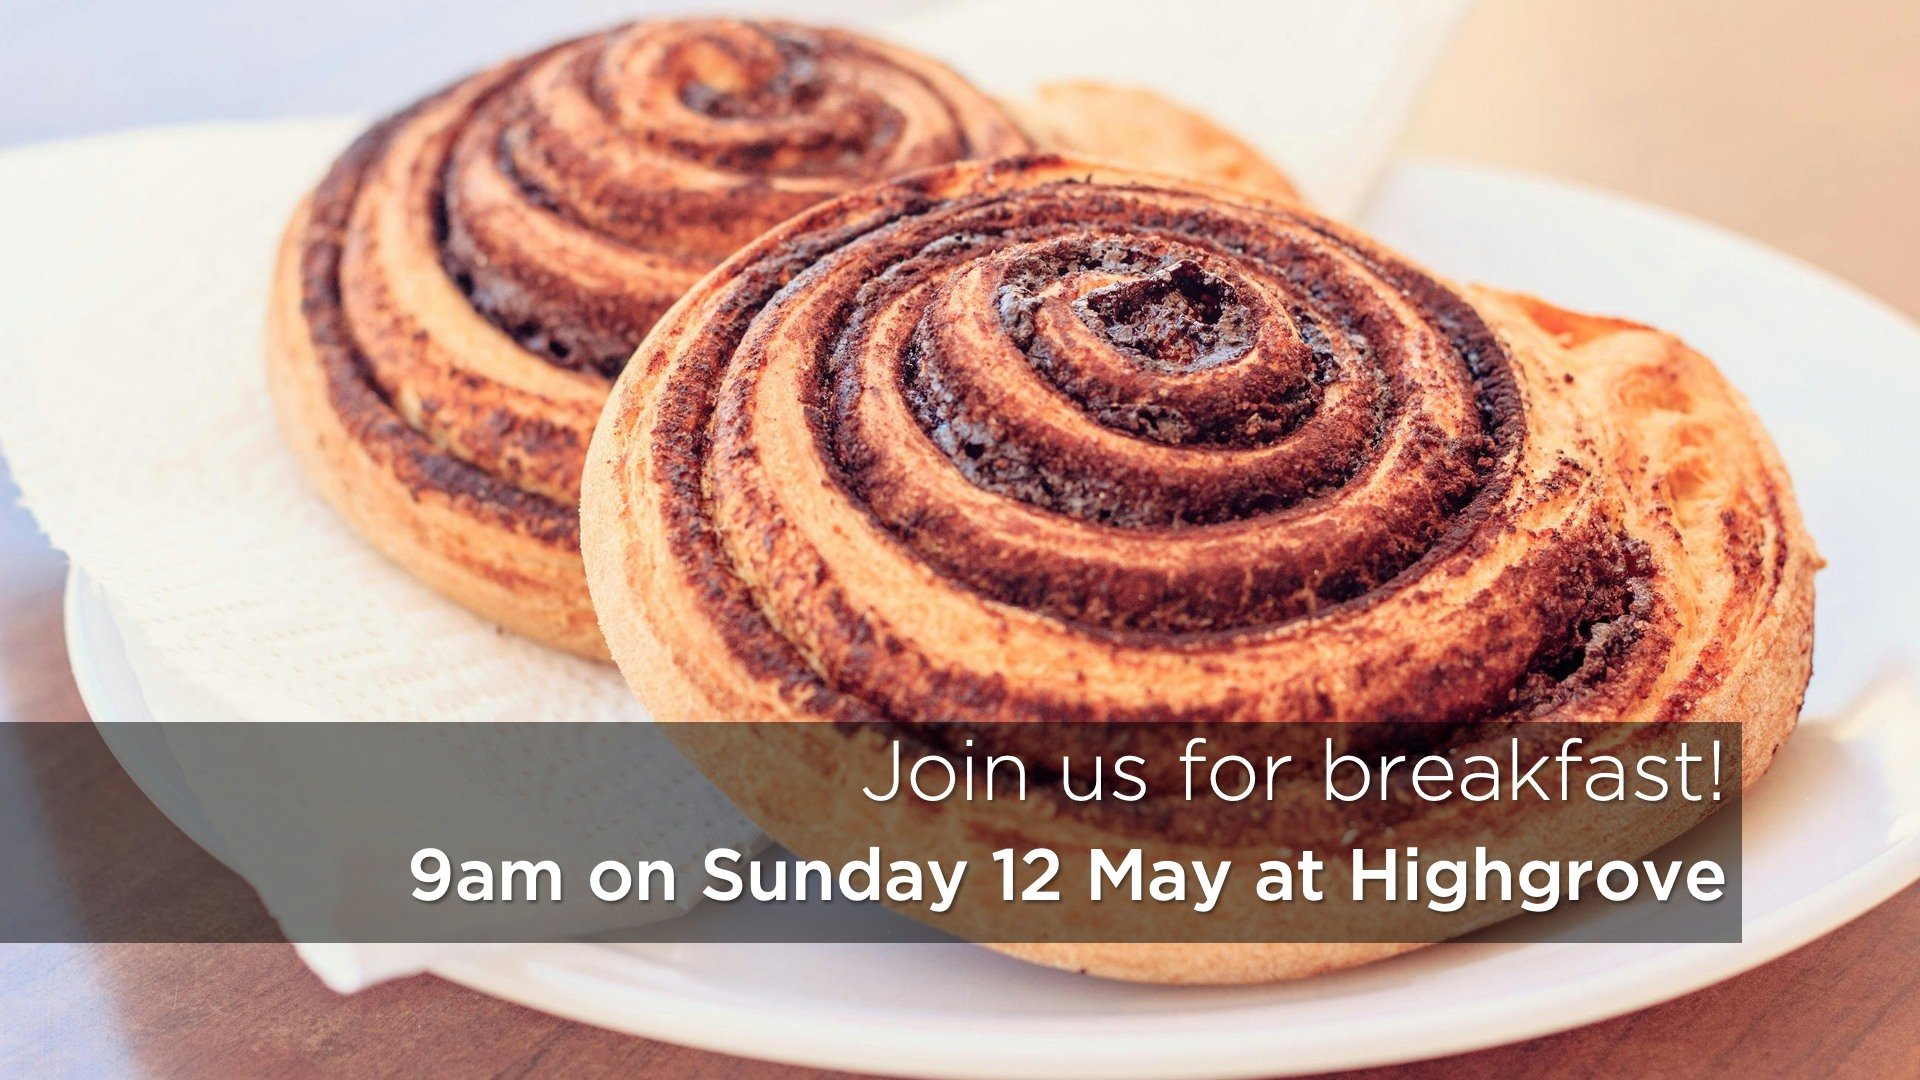 Come early for the 9.30am service on Sunday and join us for coffee/tea and pastries from 9am!